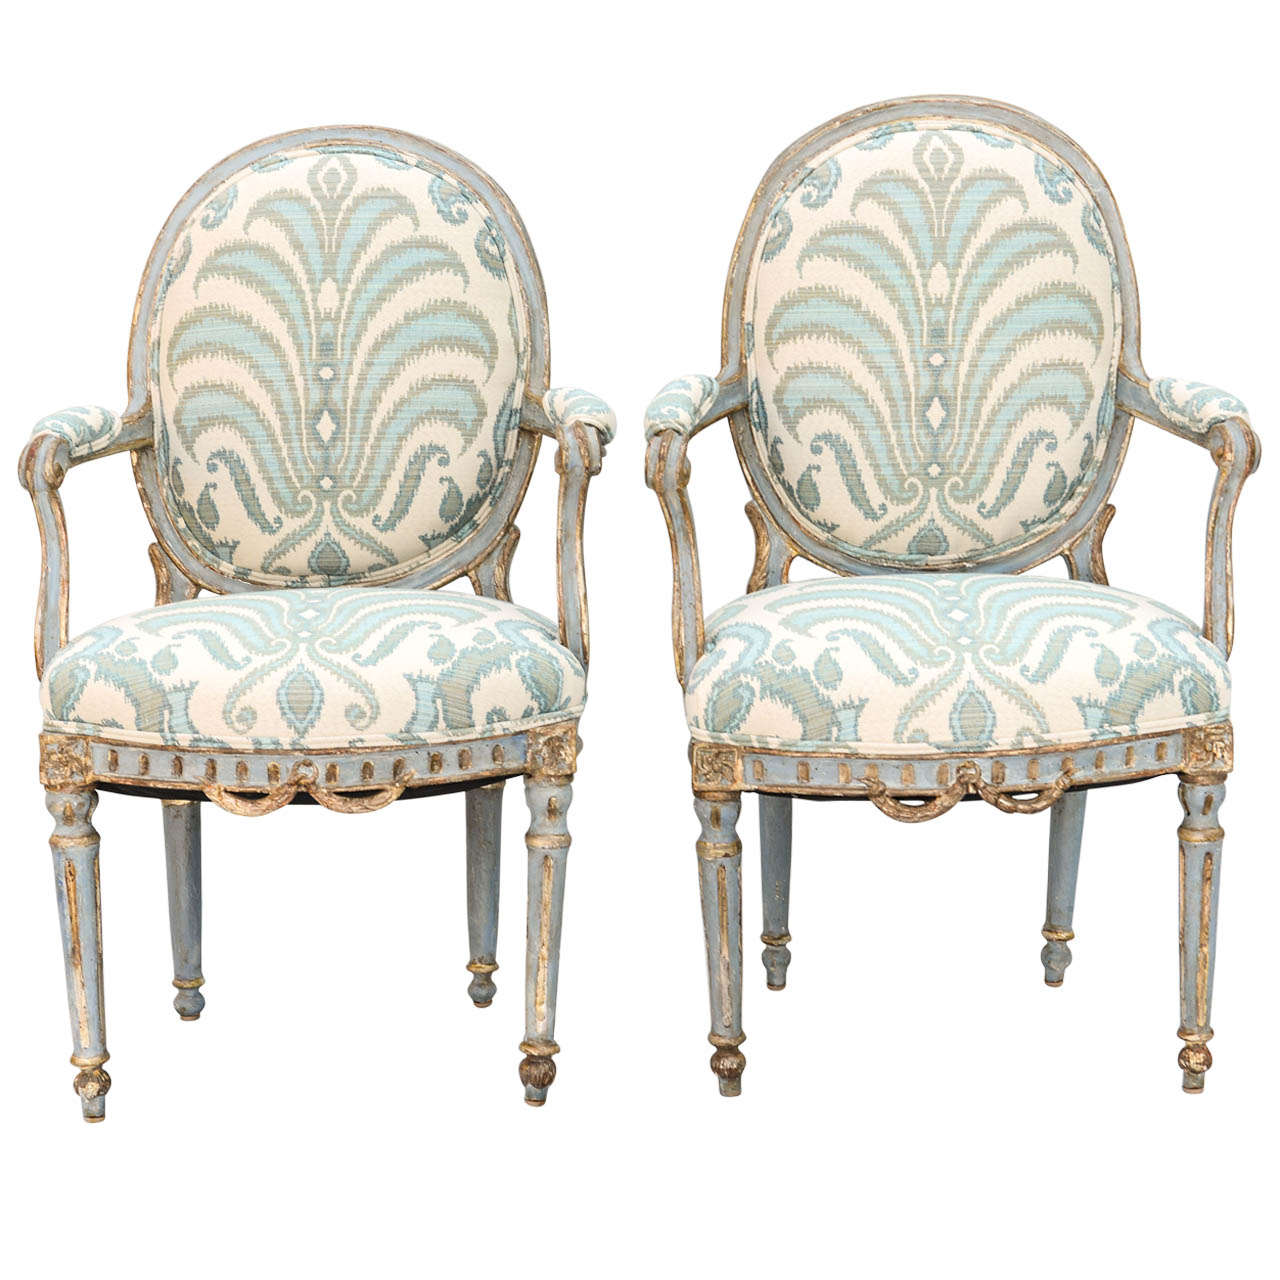 Pair of 18c. French Polychromed and Parcel Gilt Fauteuils